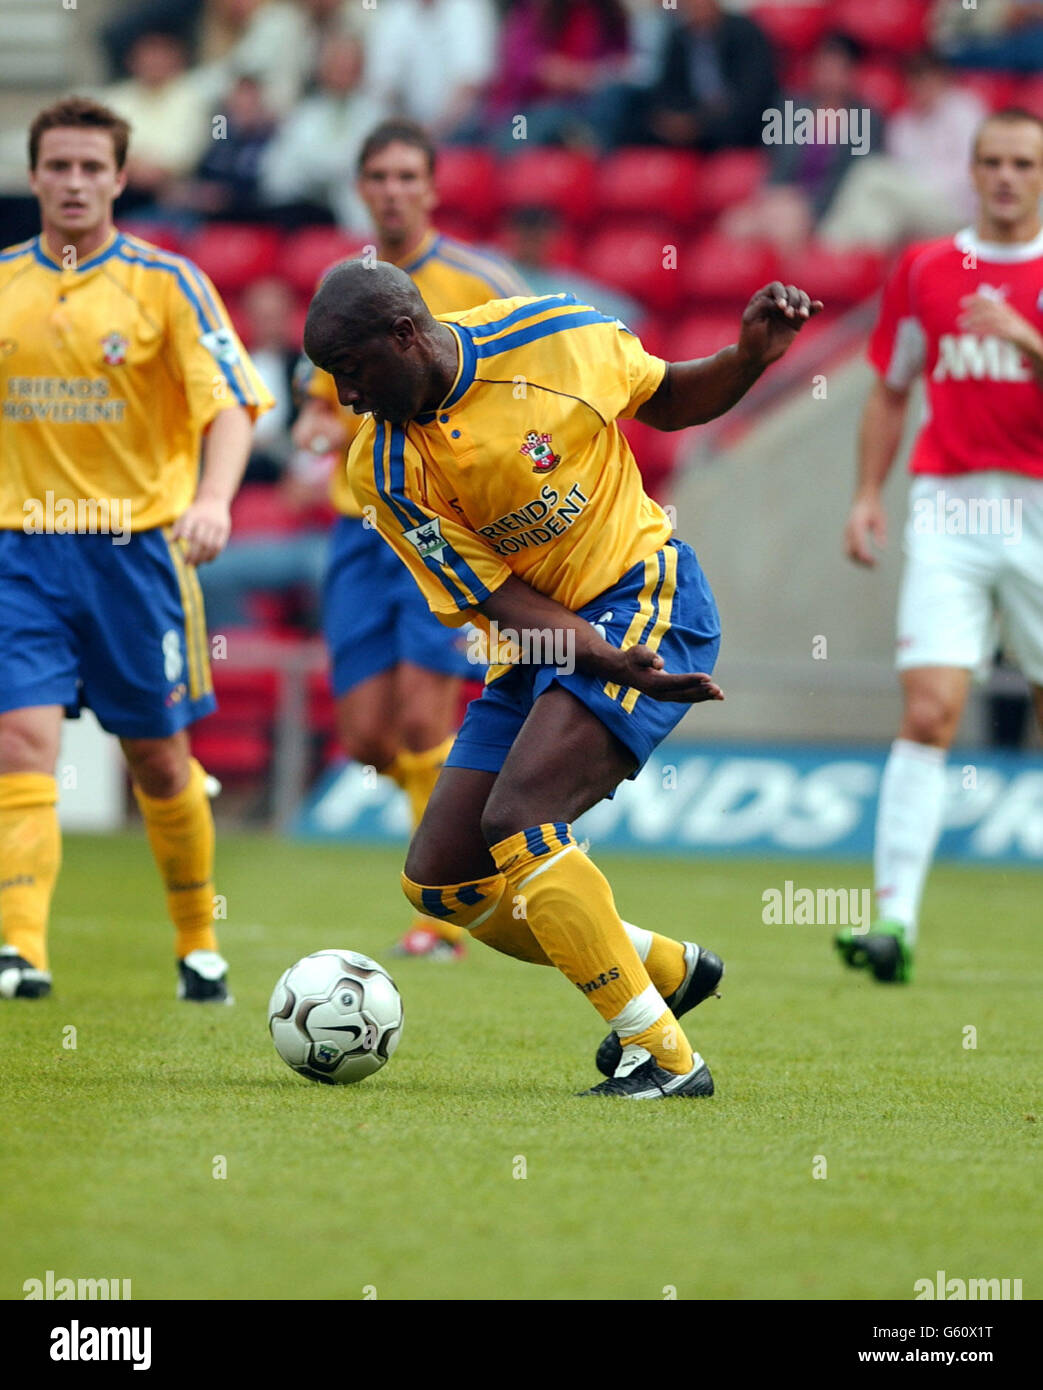 Southampton's Paul Williams in action during the pre-season friendly game between Southampton and FC Utrecht at St Mary's stadium, Southampton. Stock Photo